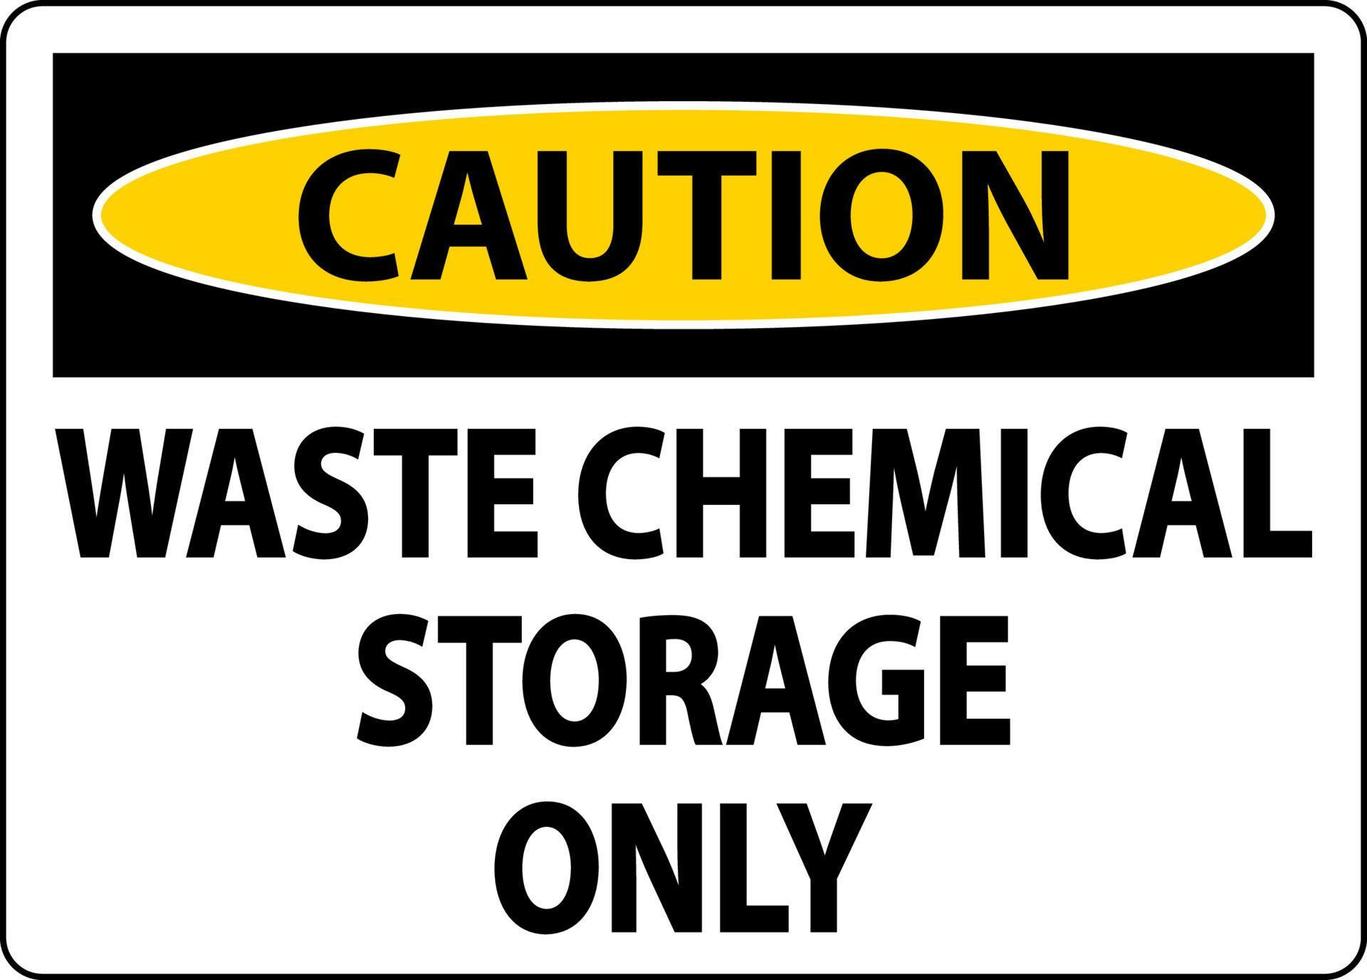 Caution Waste Chemical Storage Only Label vector